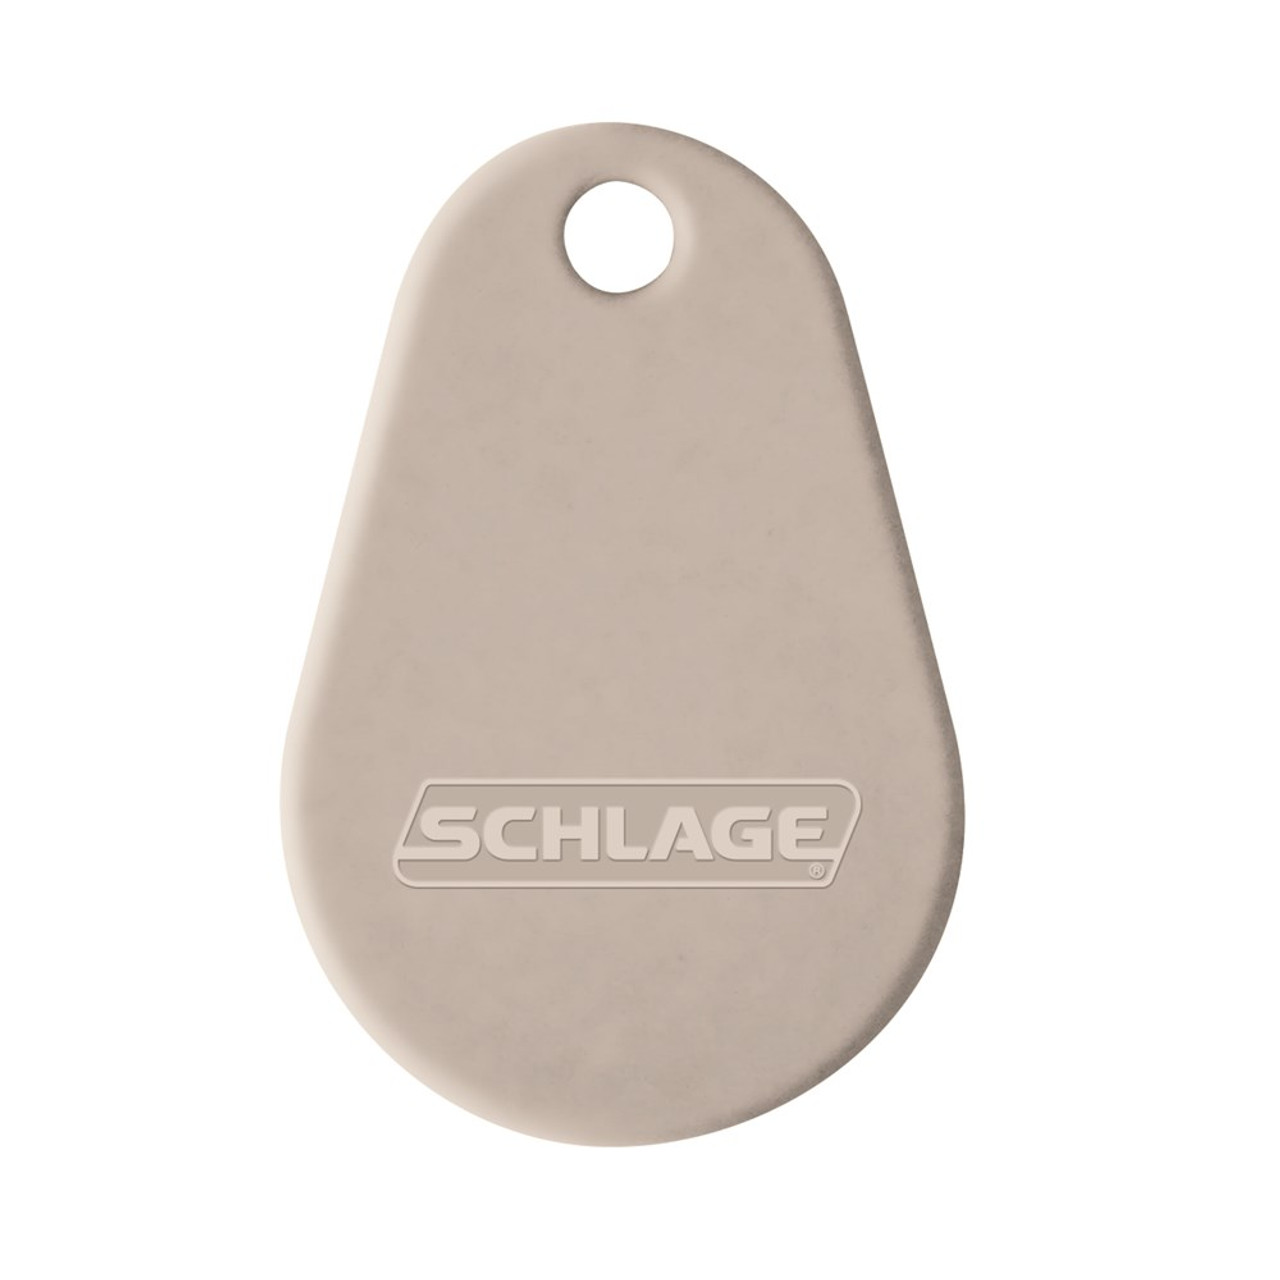 Schlage 7610T Prox Thin Key Fob - 26 Bit H10301 - ProxCards